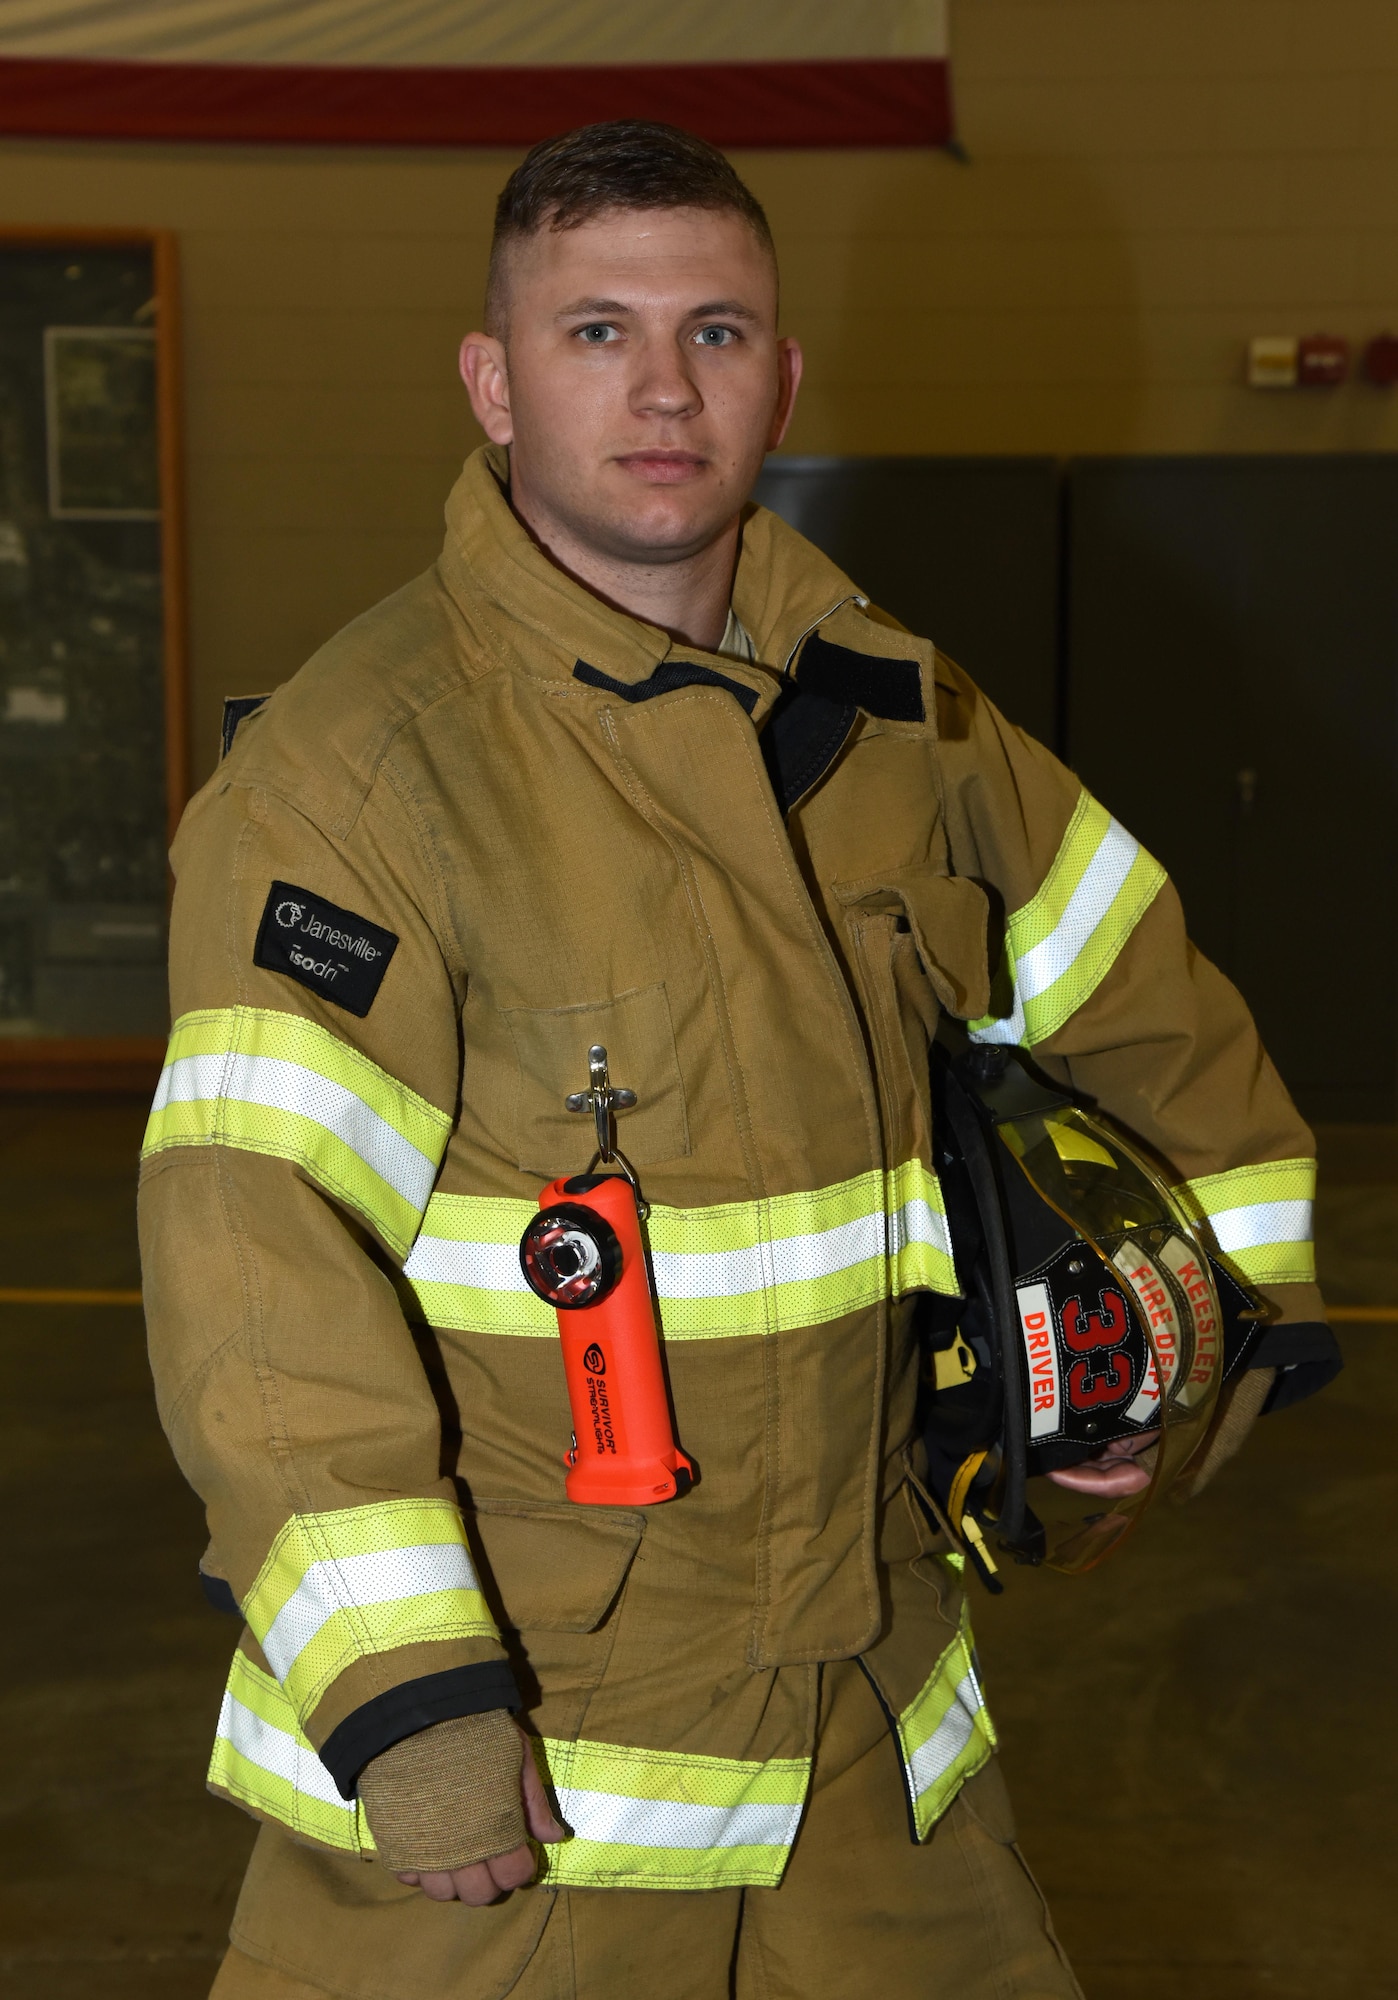 Senior Airman Tyler Fisher, 81st Infrastructure Division firefighter, poses for a photo Dec. 15, 2016, on Keesler Air Force Base, Miss. Fisher has been in the Air Force for four years and after graduating technical school, he found out his first base was the same base as his father. (U.S. Air Force photo by Kemberly Groue)